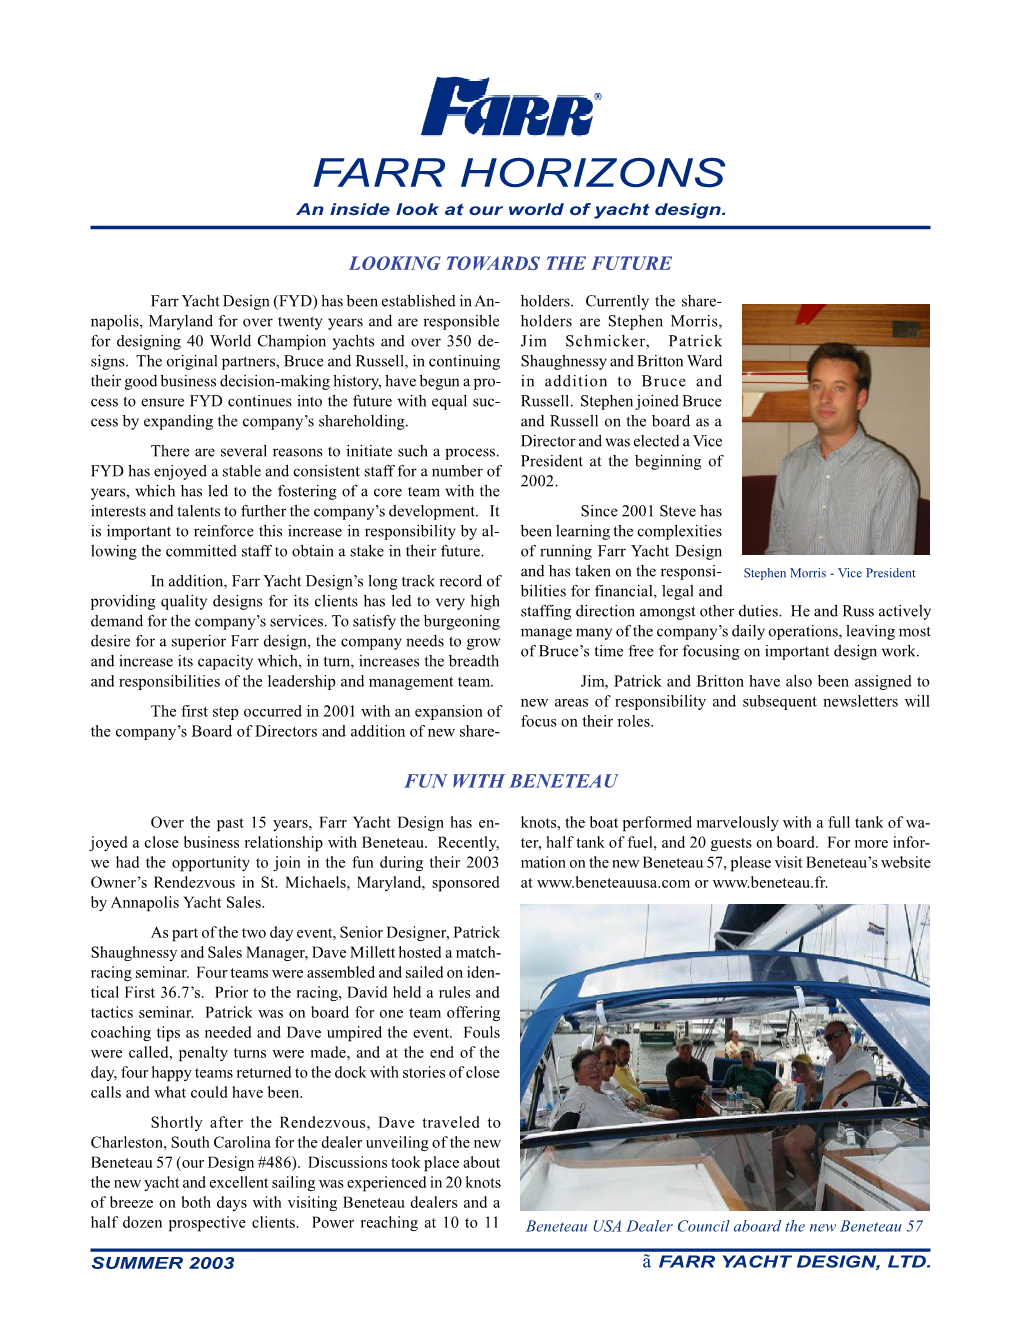 FARR HORIZONS an Inside Look at Our World of Yacht Design